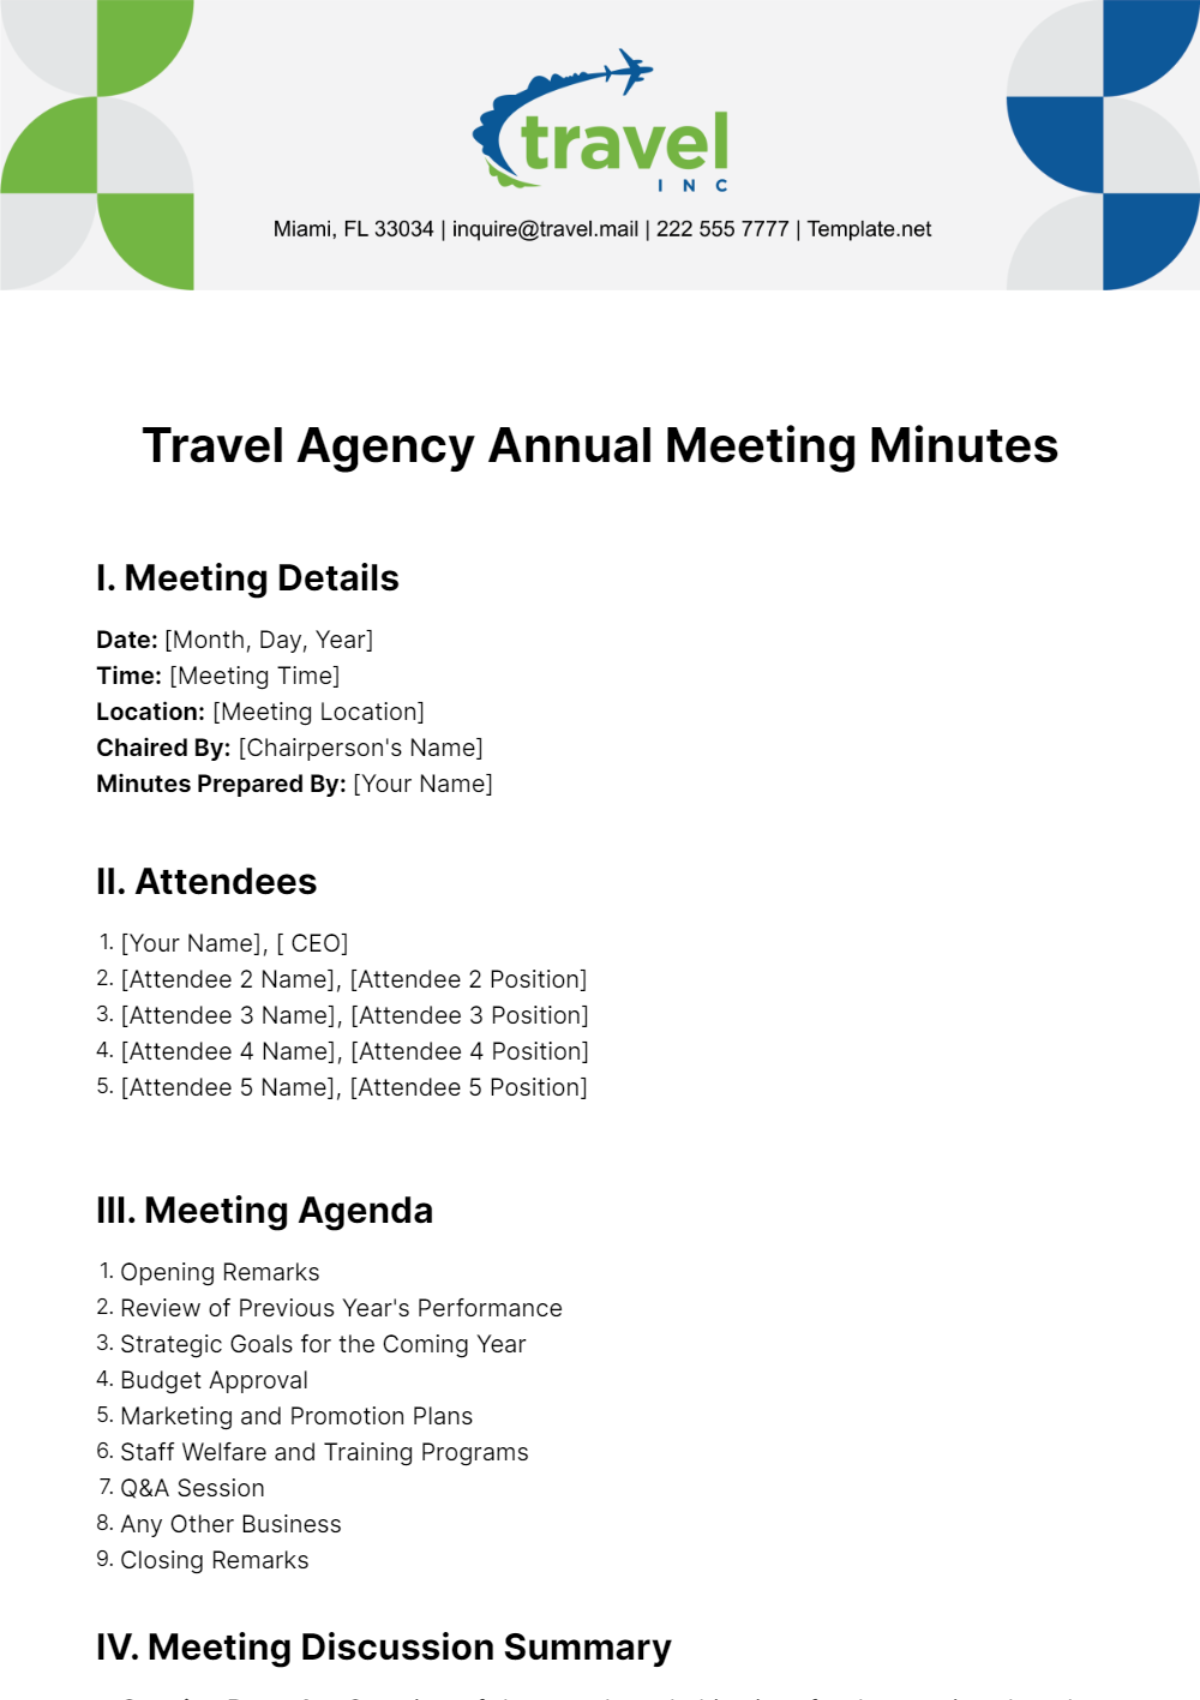 Travel Agency Annual Meeting Minutes Template